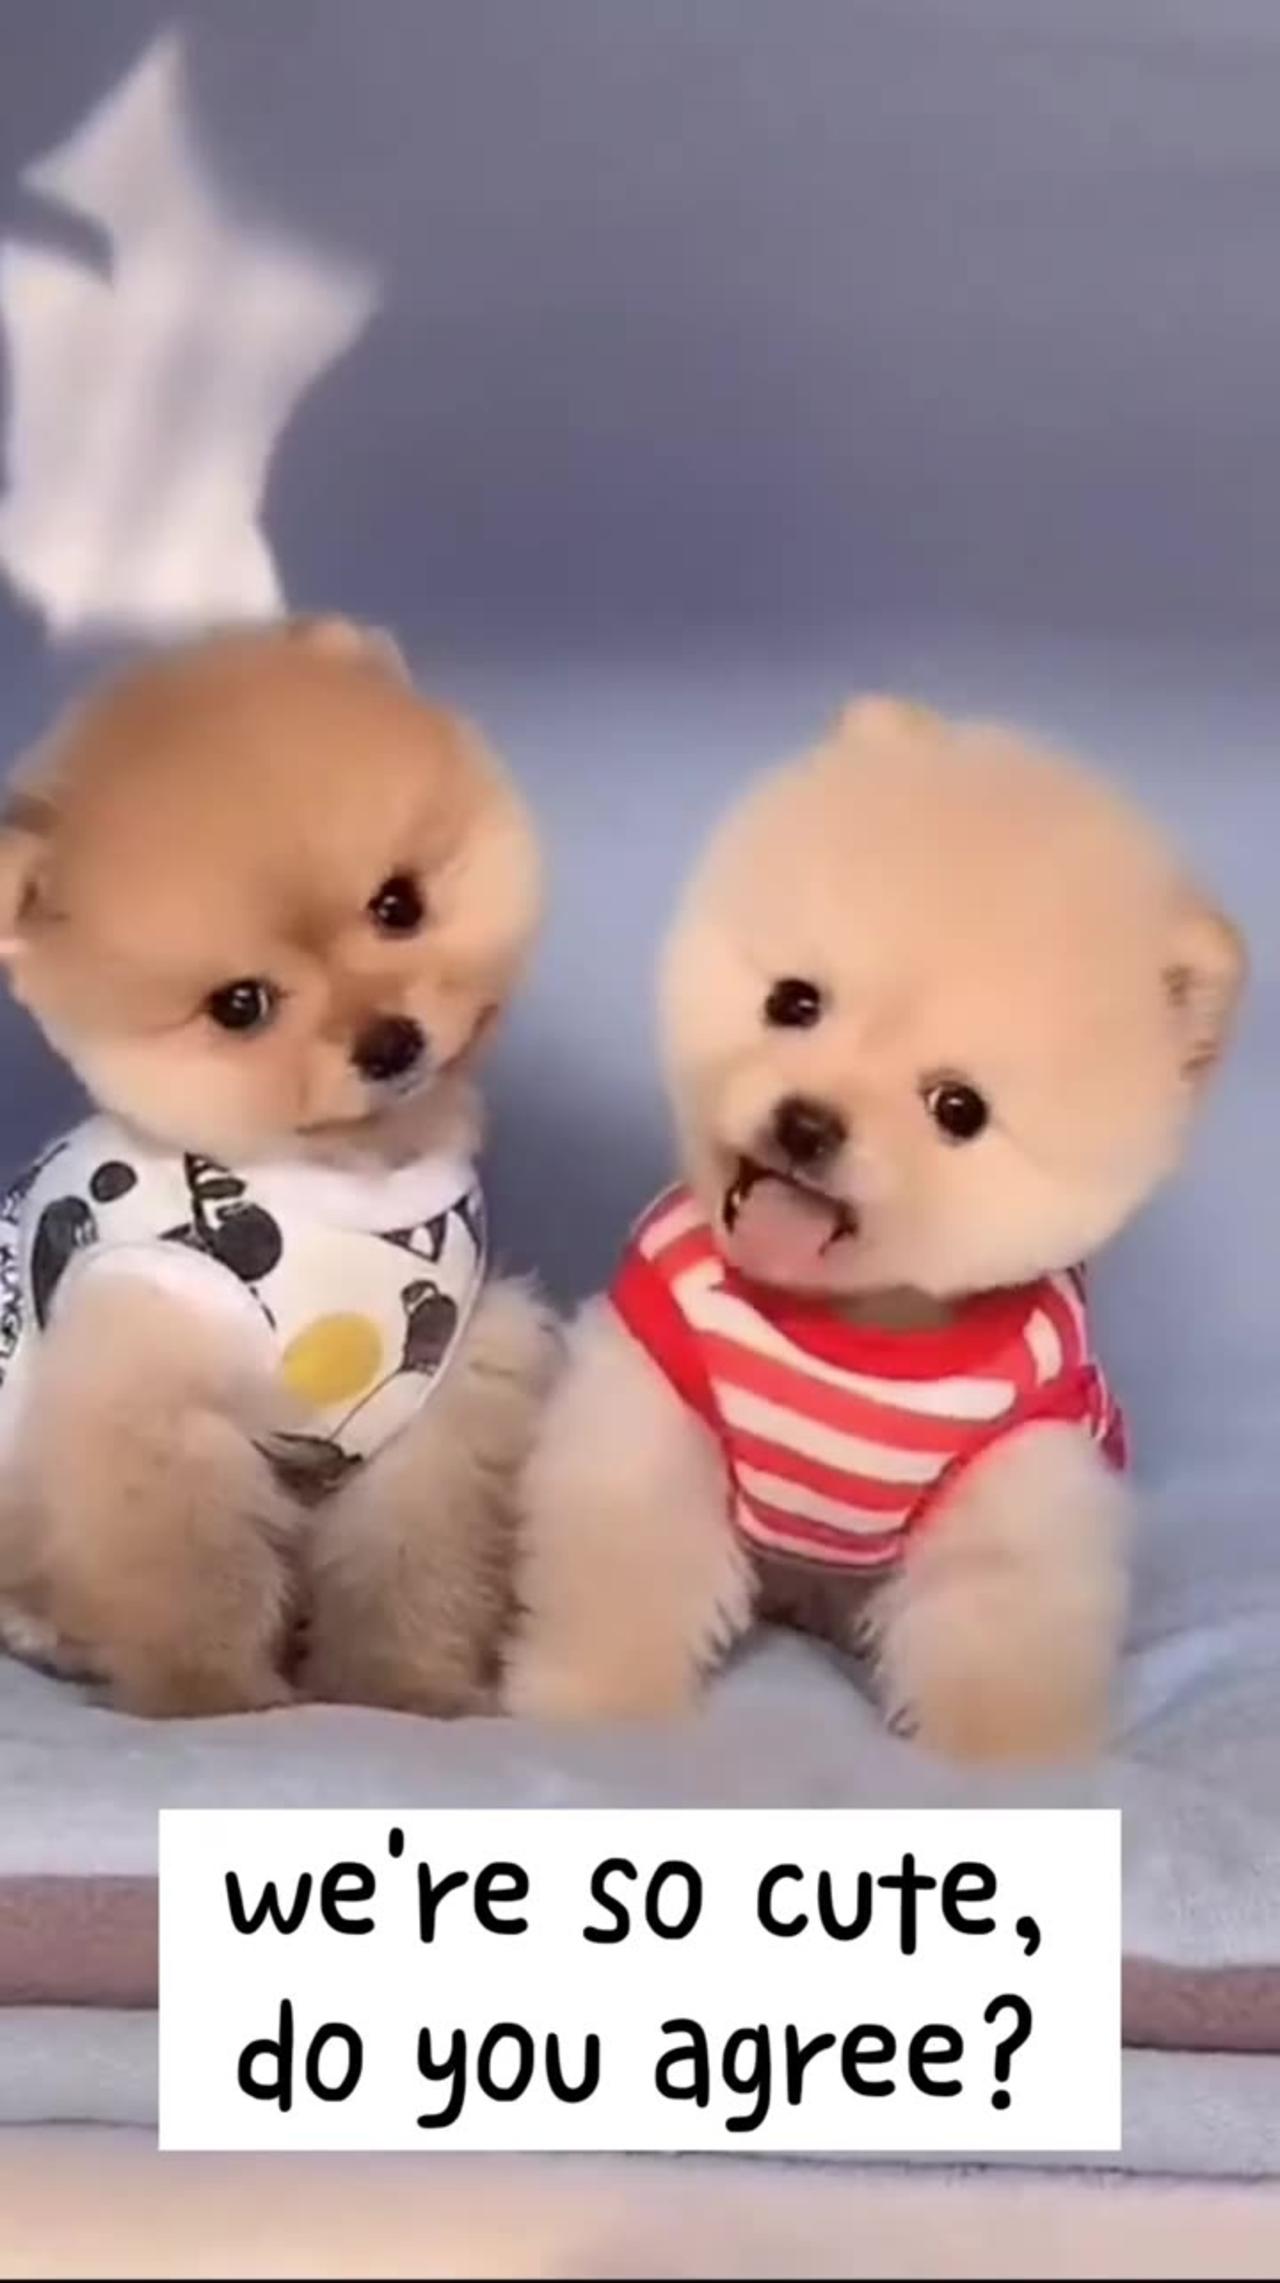 Two Adorable Dogs: Are They the Cutest? 🐶😍